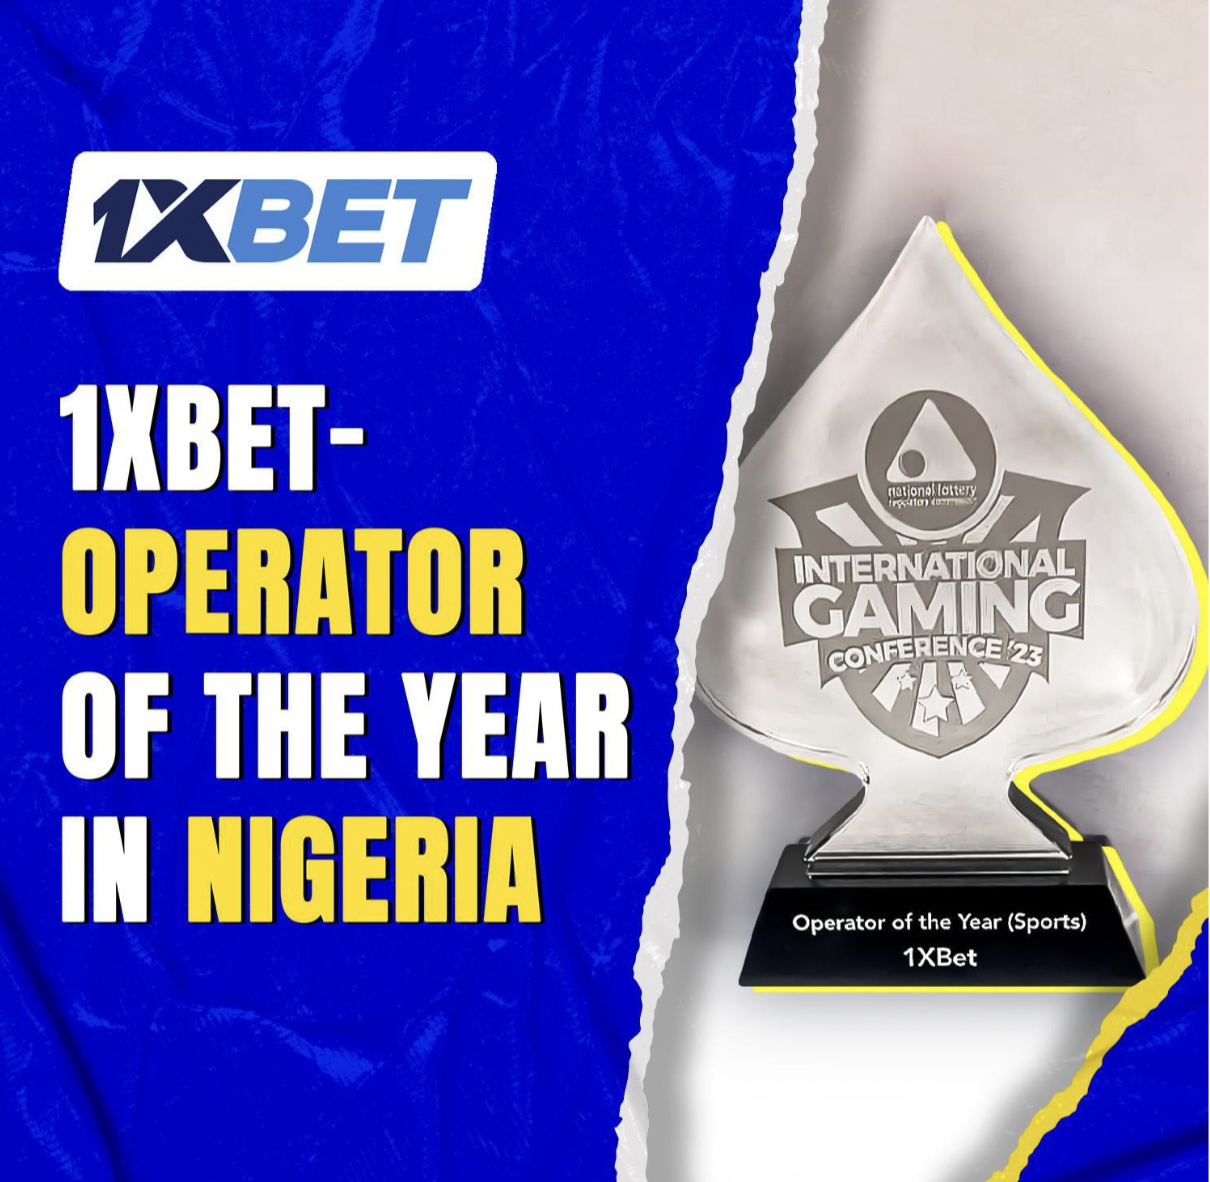 1xBet became the Operator of the Year in sport betting in Nigeria